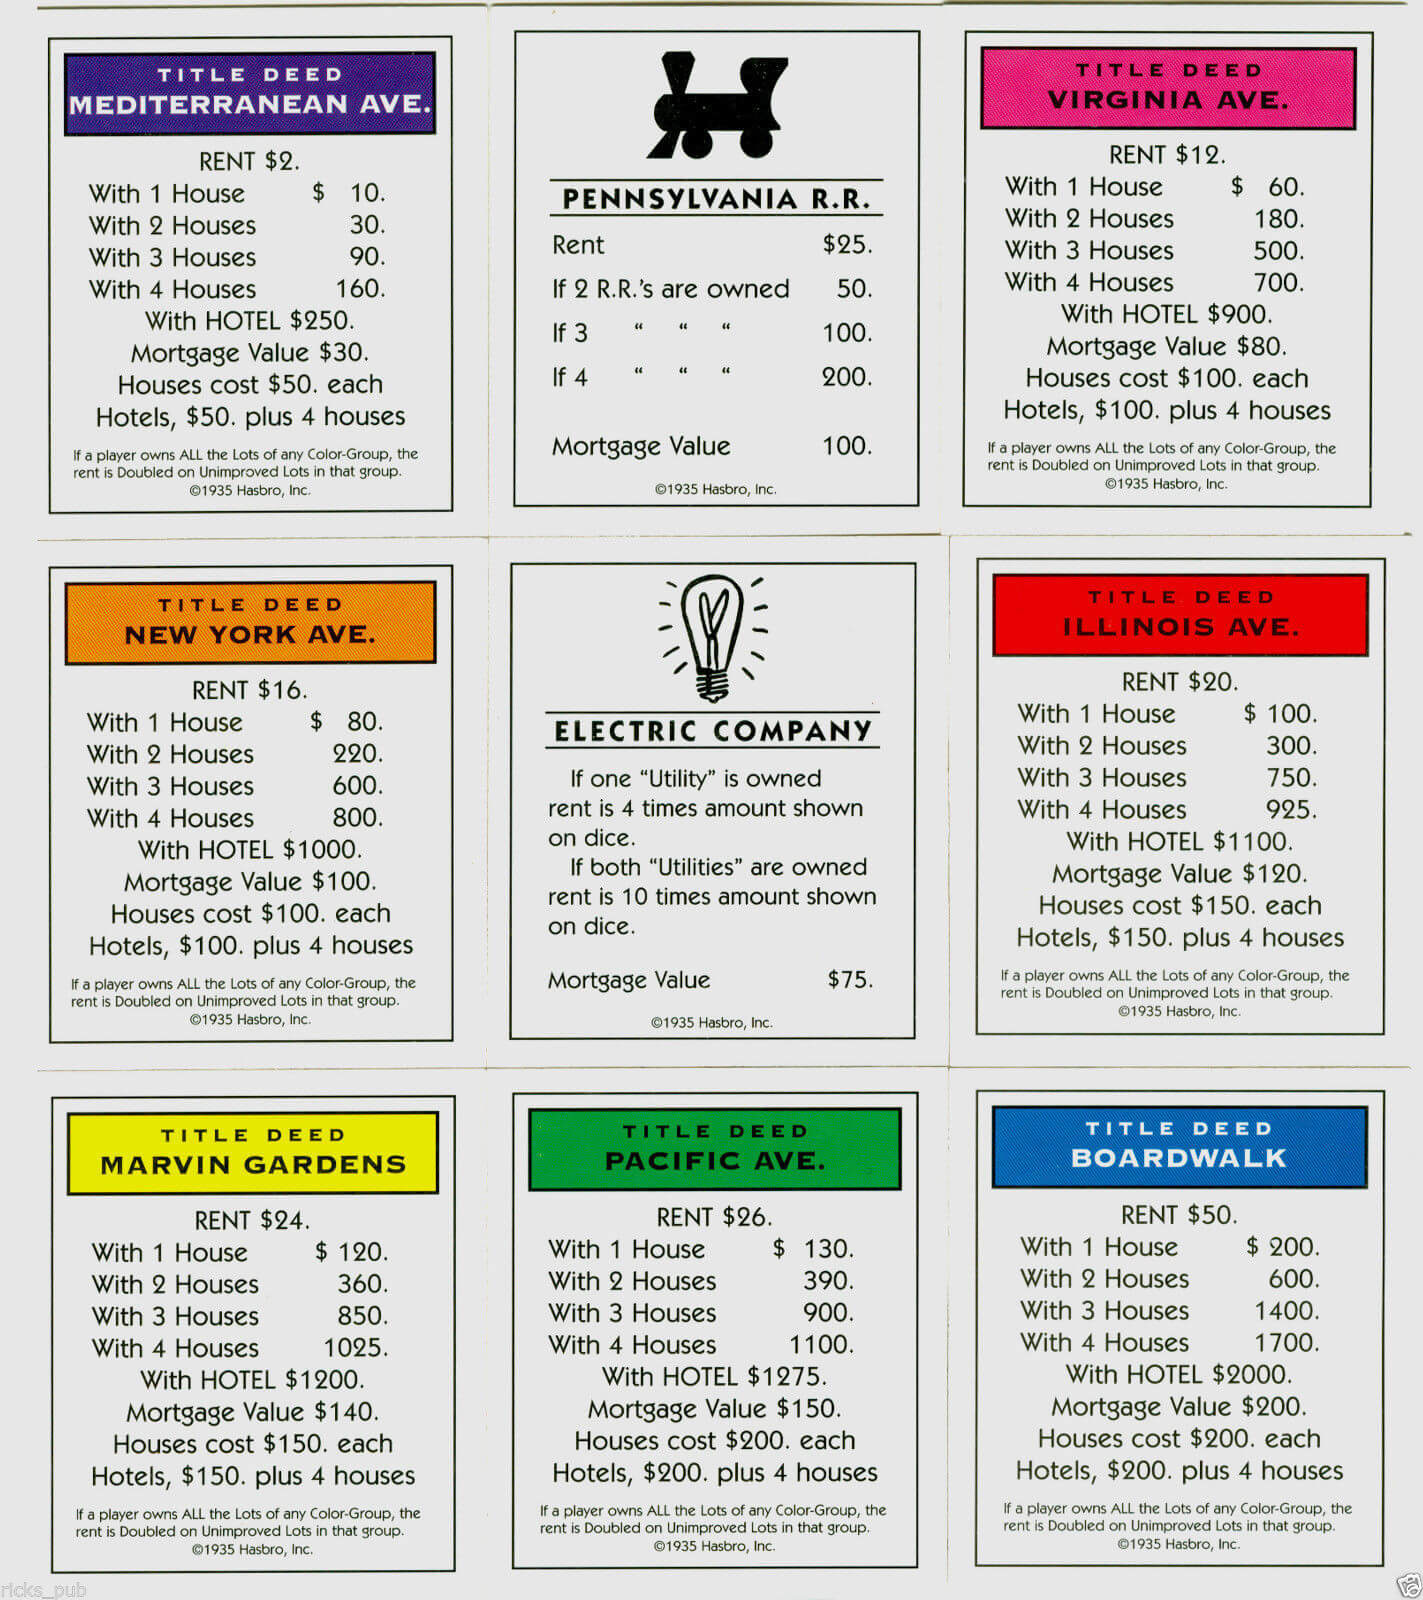 1C1 Monopoly Chance Card Template | Wiring Library Inside Chance Card Template